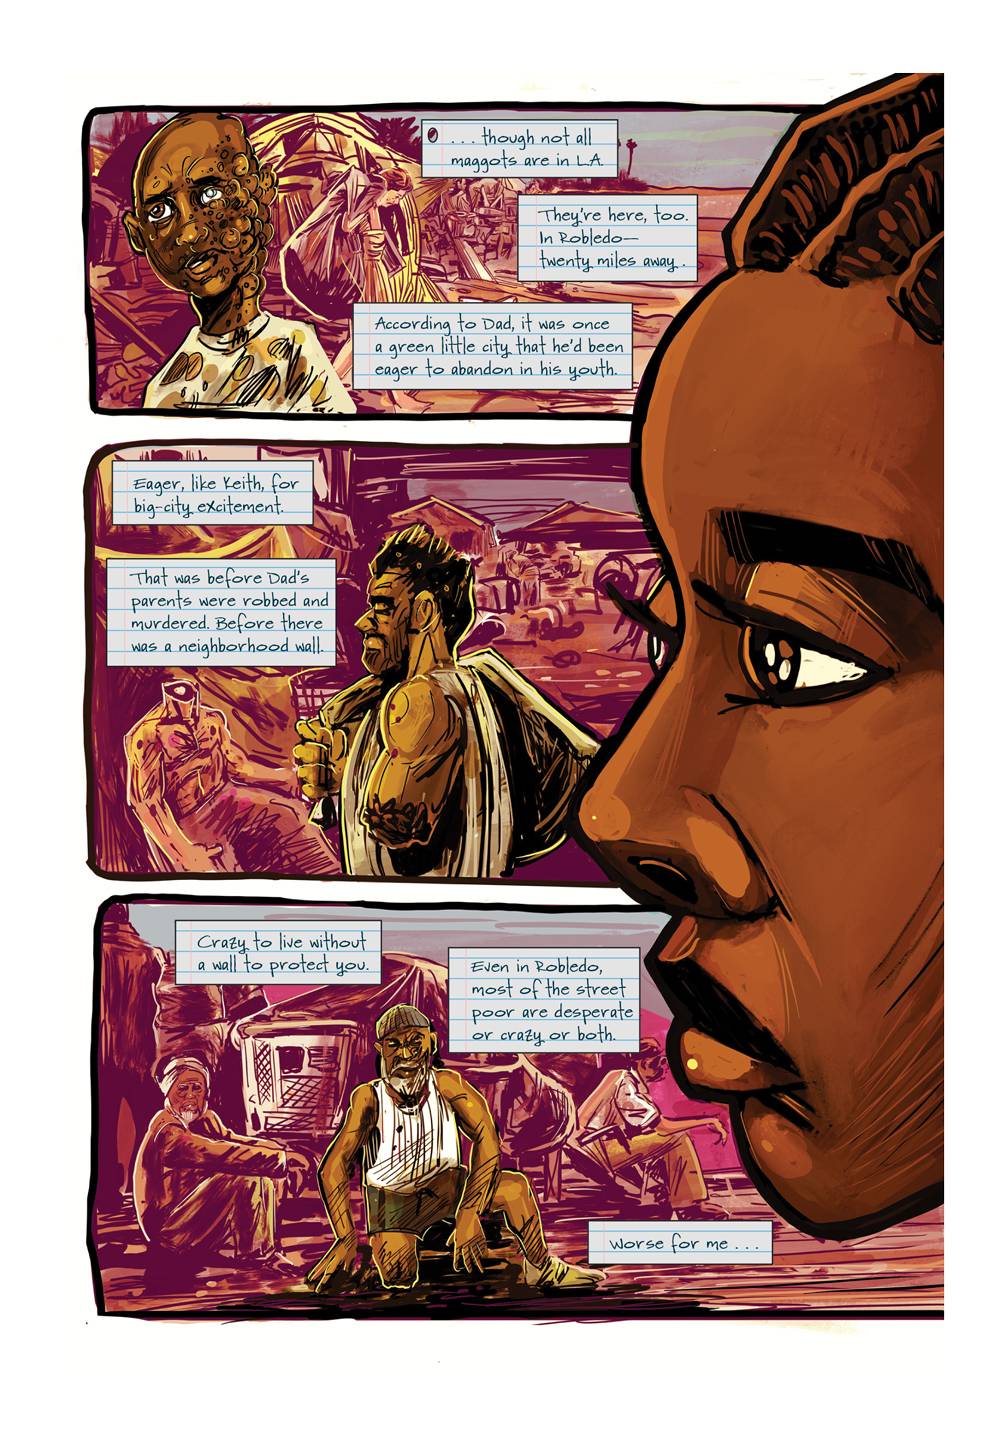 A page from â€œParable of the Sower.â€ There are three horizontal panels featuring a disfigured person in front of a refugee camp-like background. The text bubbles are the words of a young person explaining the dangers of living outside a walled city. On the right side of the page is the profile of a young, black personâ€™s face. Words by Damian Duffy, art by John Jennings. Image courtesy of Damian Duffy.